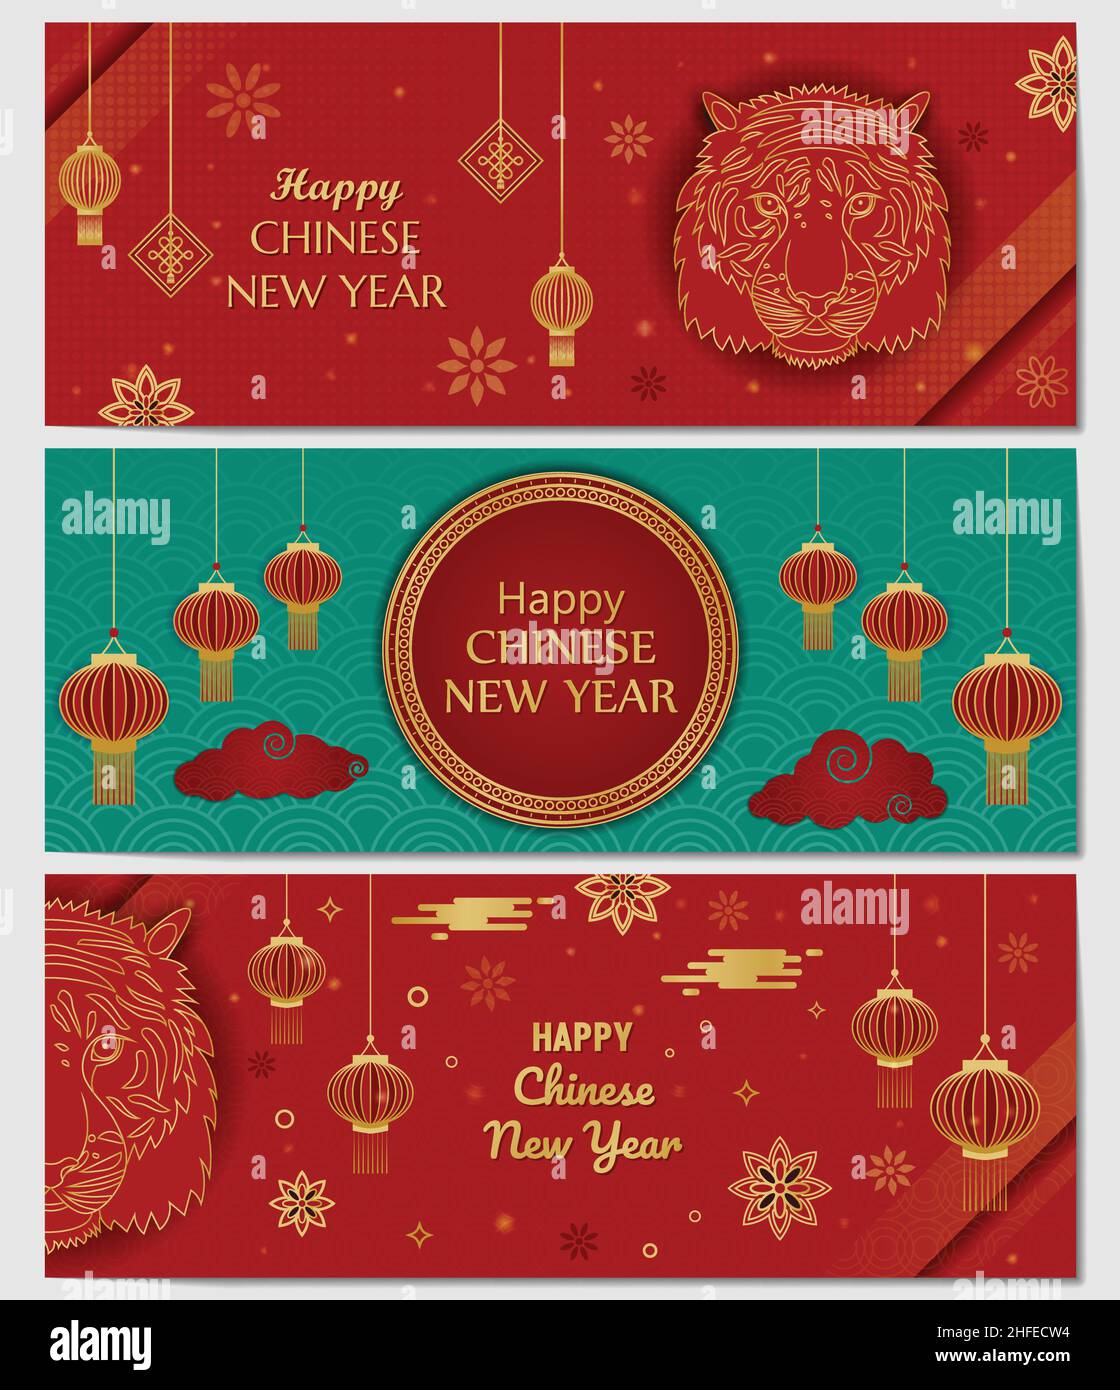 Happy Chinese New Year Tiger Banner Collection set of 3 Wallpaper Traditional Chinese golden red background frame greeting with lanterns and clouds Stock Vector